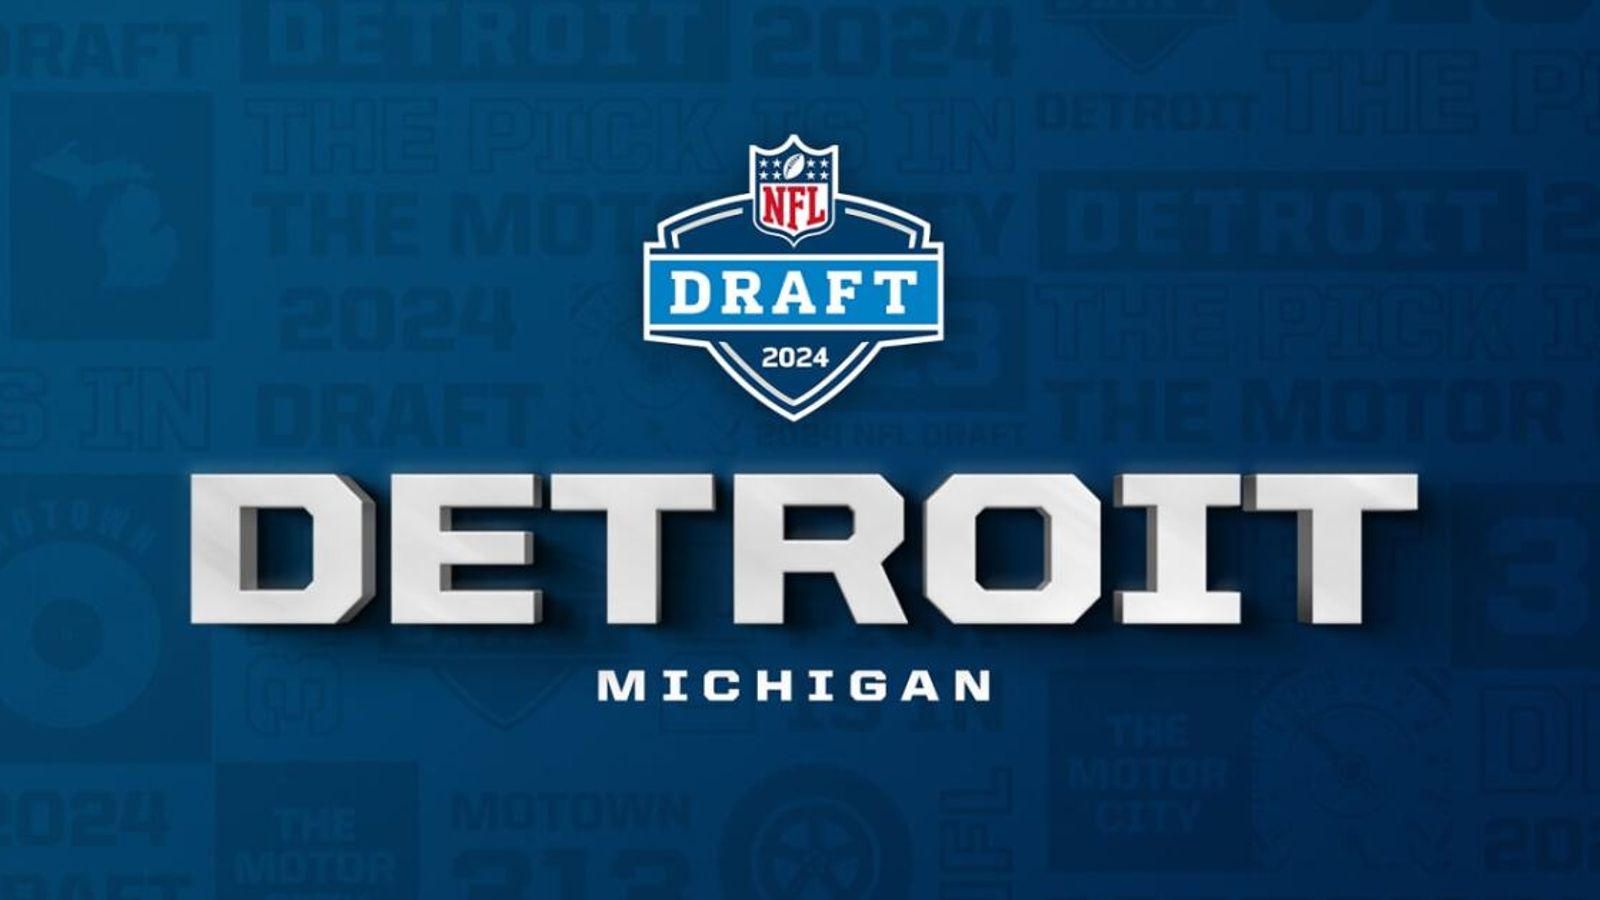 Everything Chicago Bears fans need to know about the 2024 NFL Draft